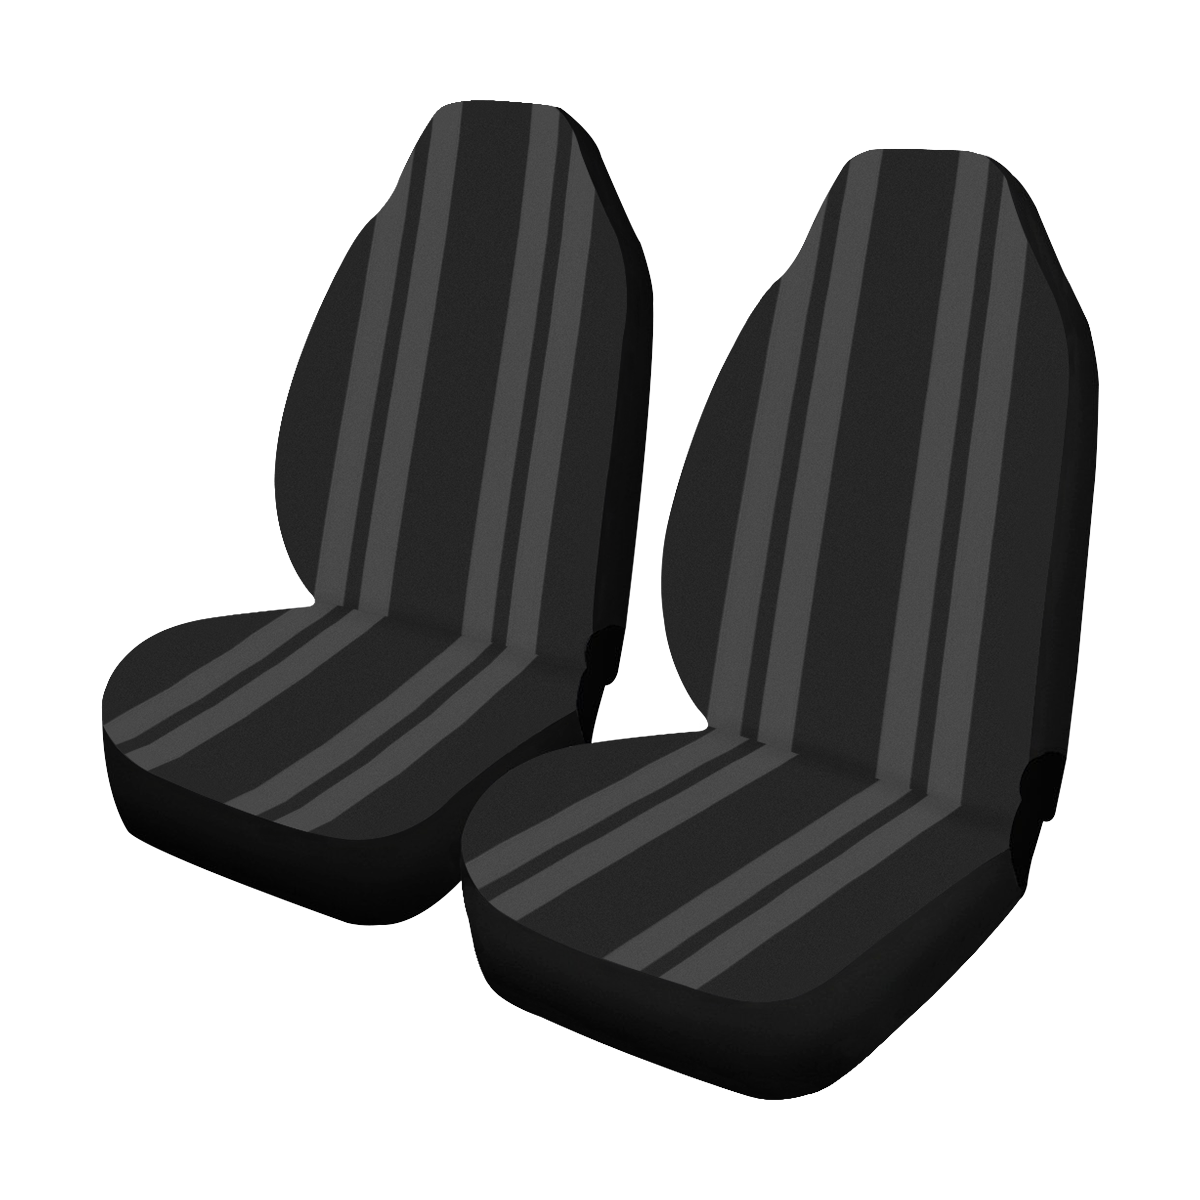 Gray/Black Vertical Stripes Car Seat Covers (Set of 2)